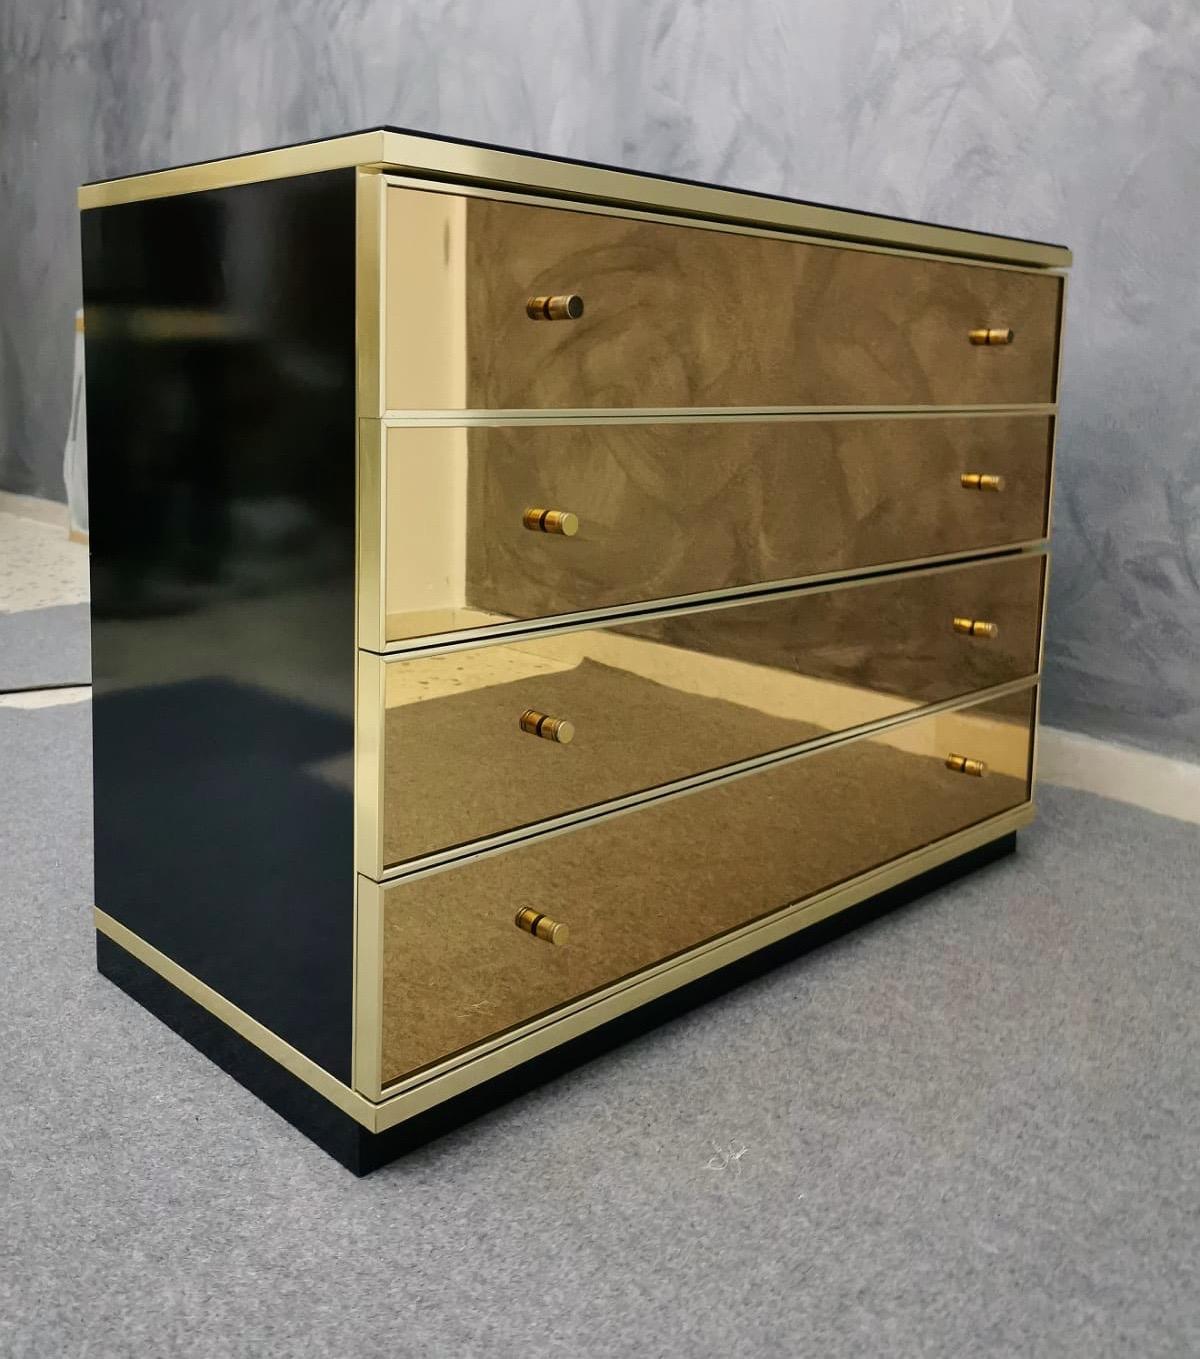 Chest of drawers commode or dresser by the designer Renato Zevi. Black lacquered wood, brass and goldish smoke mirror faces, black opaline glass top. Famous design like Willy Rizzo, Mario Sabot, Guy Lefèvre, Mahey, Maison Jansen.